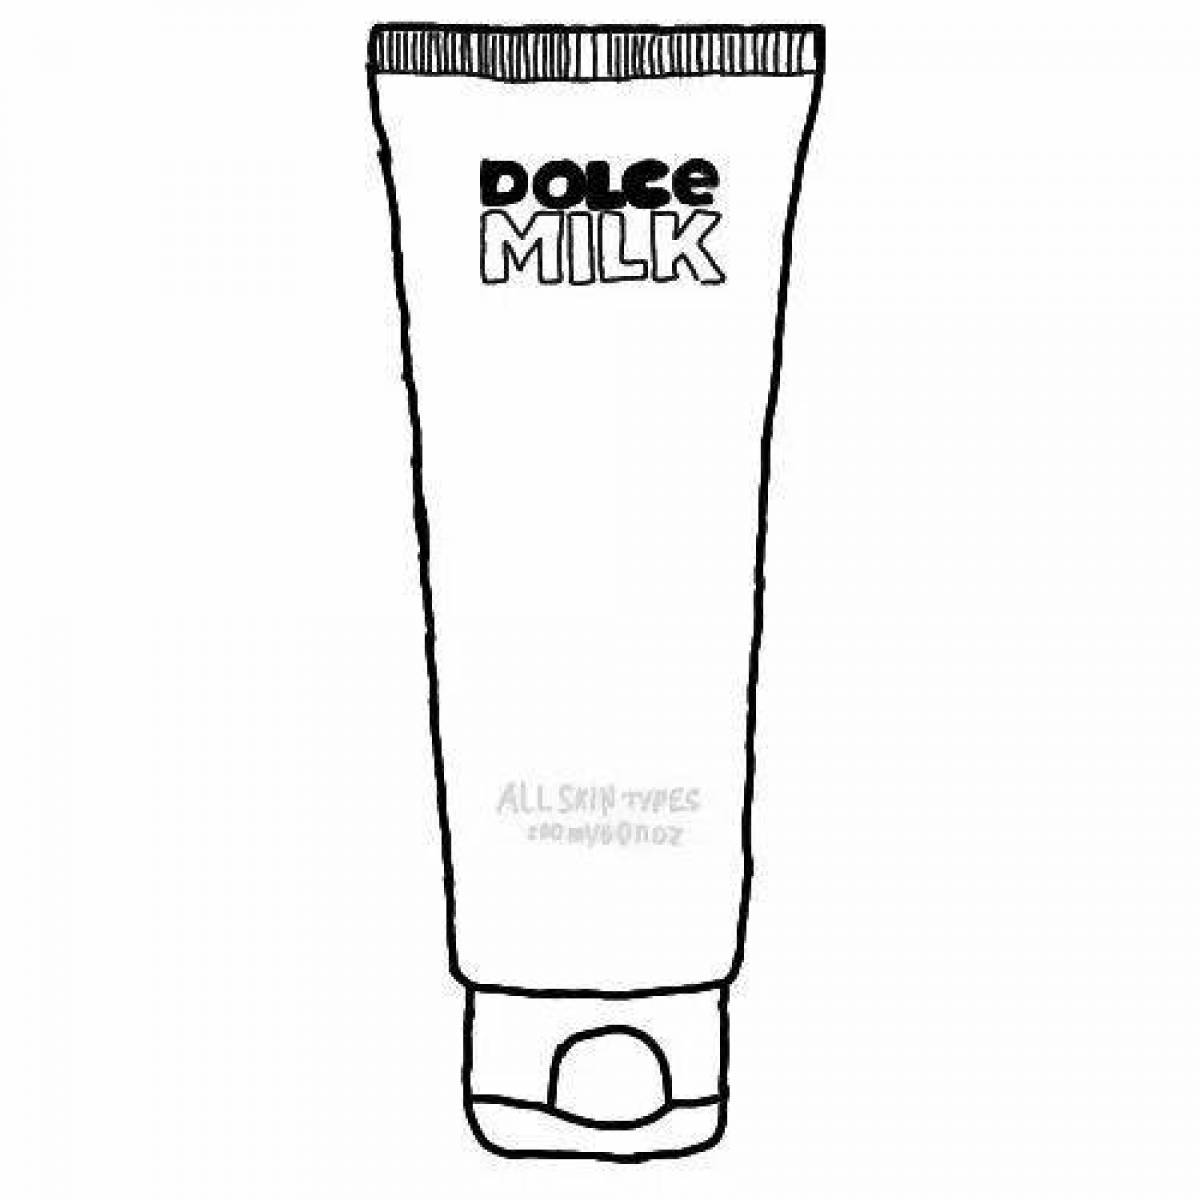 Coloring book bewitching milk cosmetics dolce